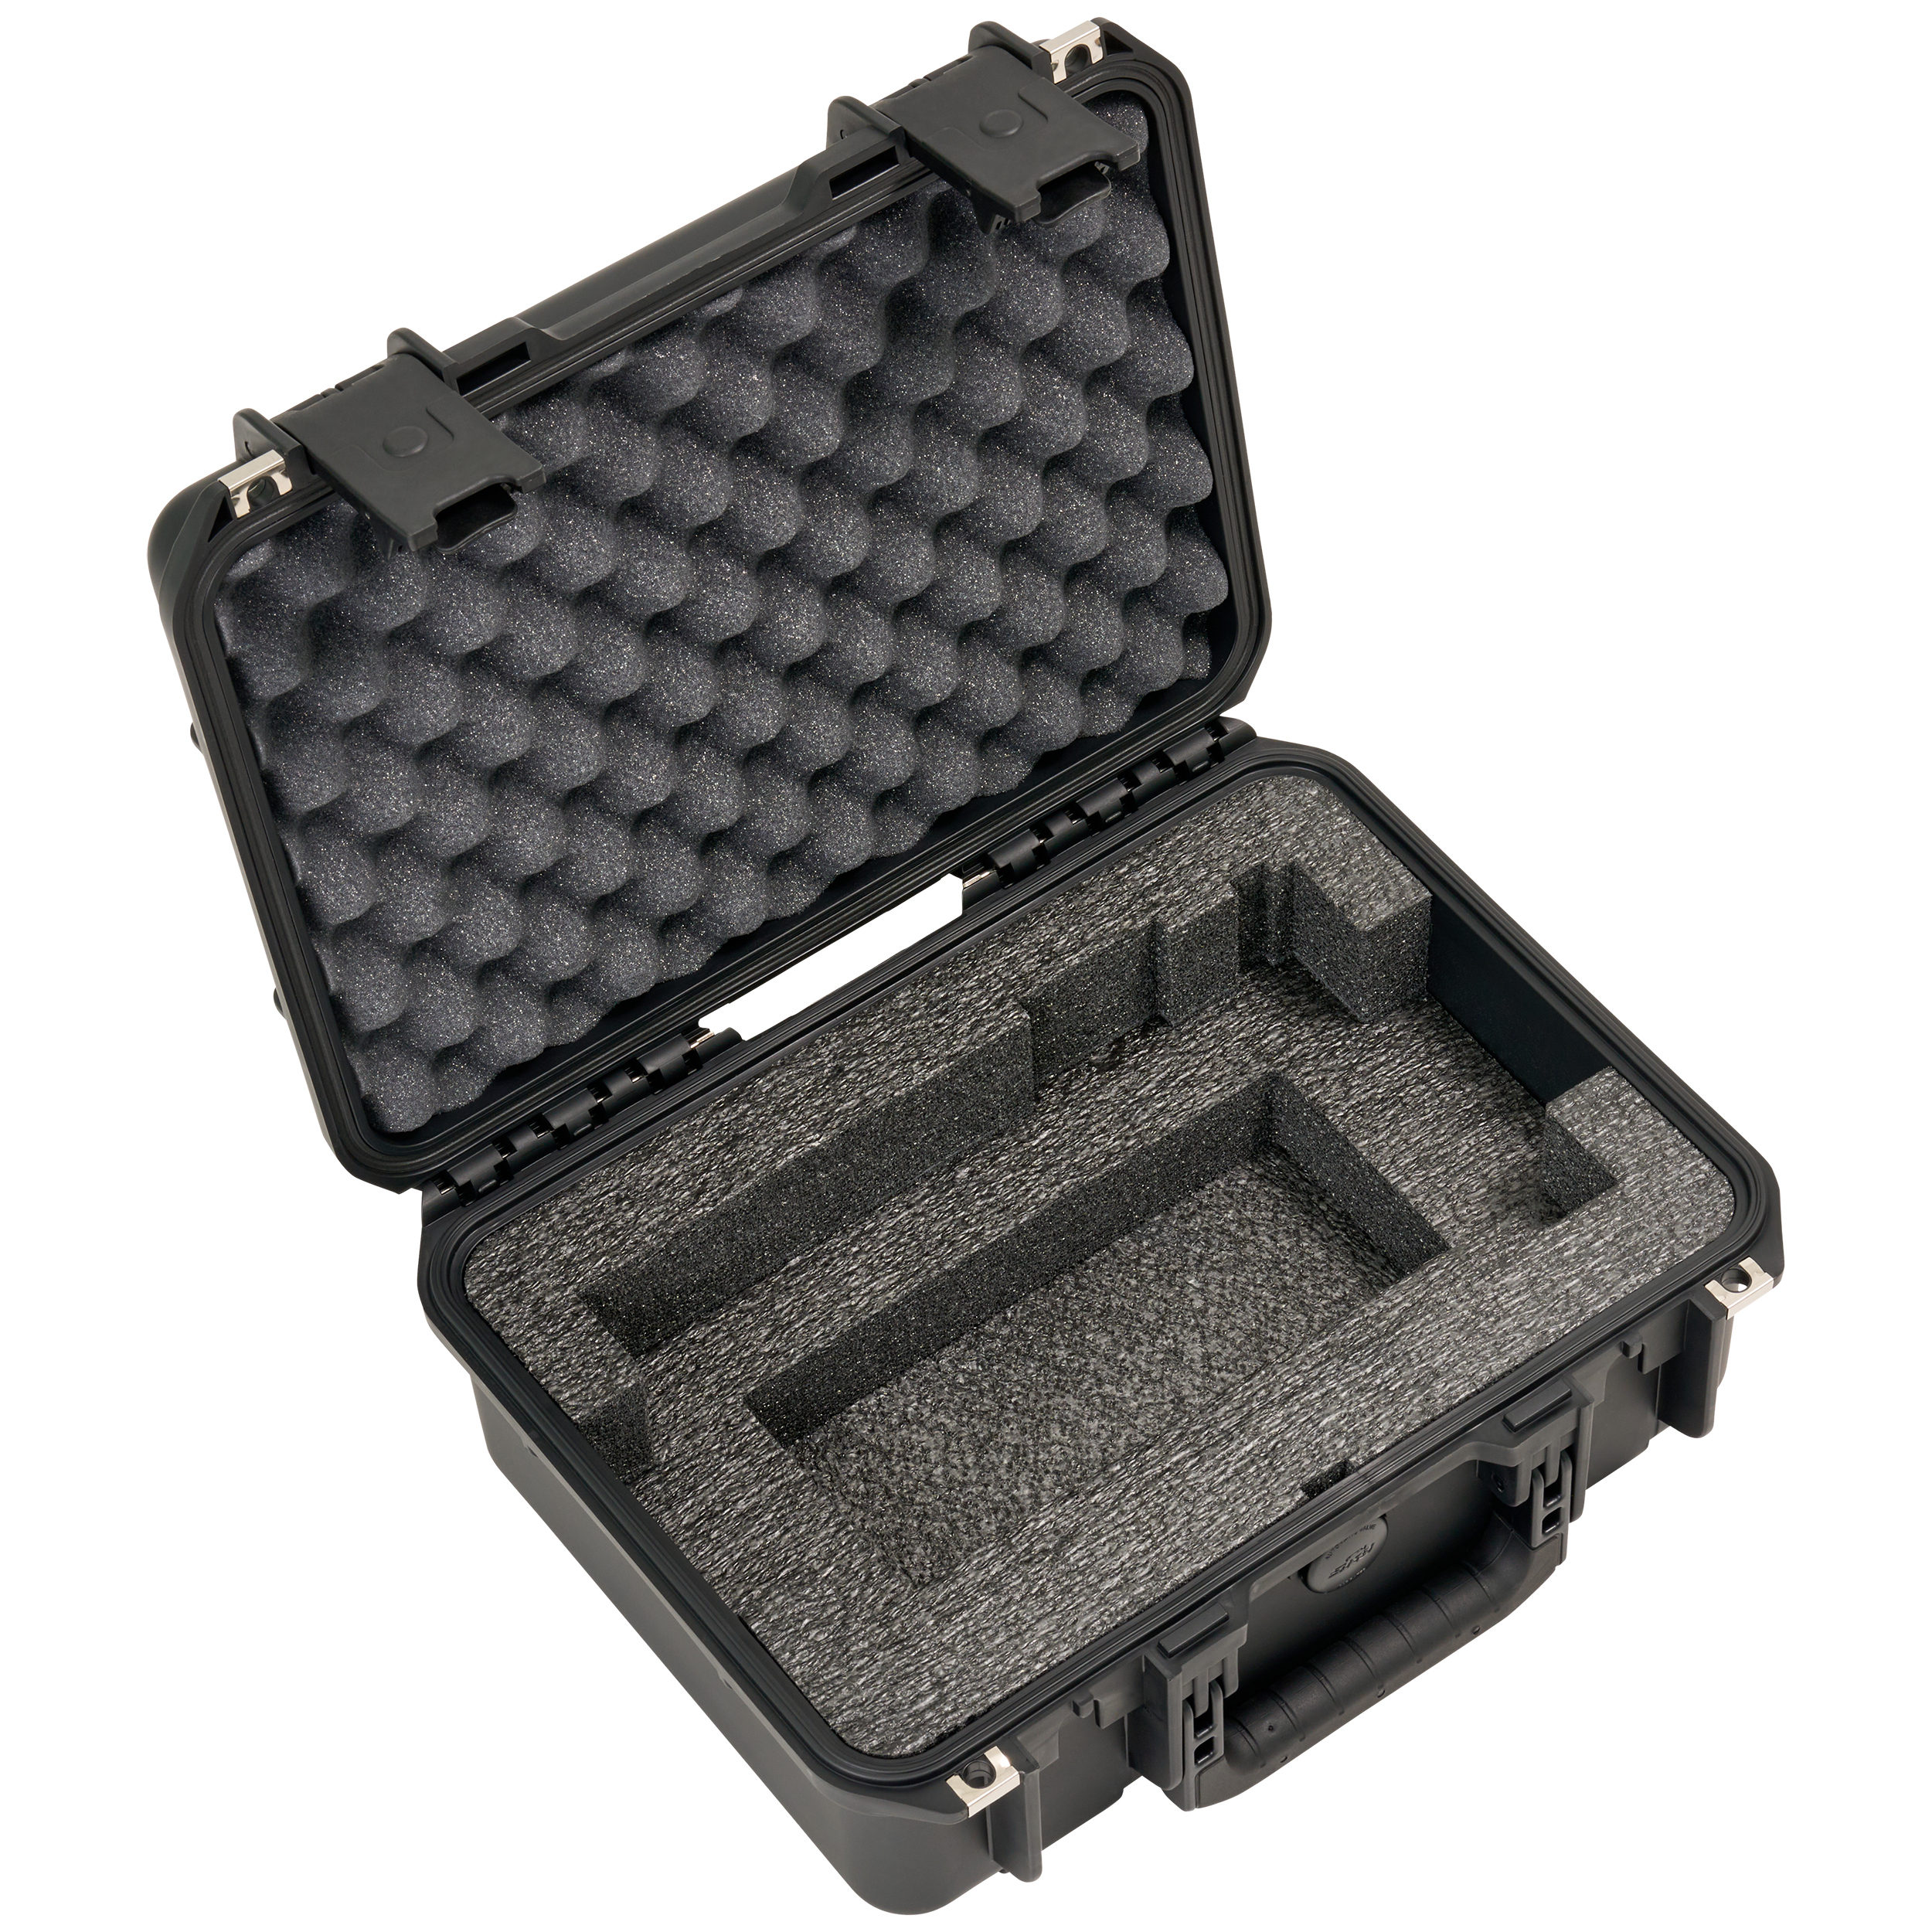 BYFP ipCase for Roland V-8HD